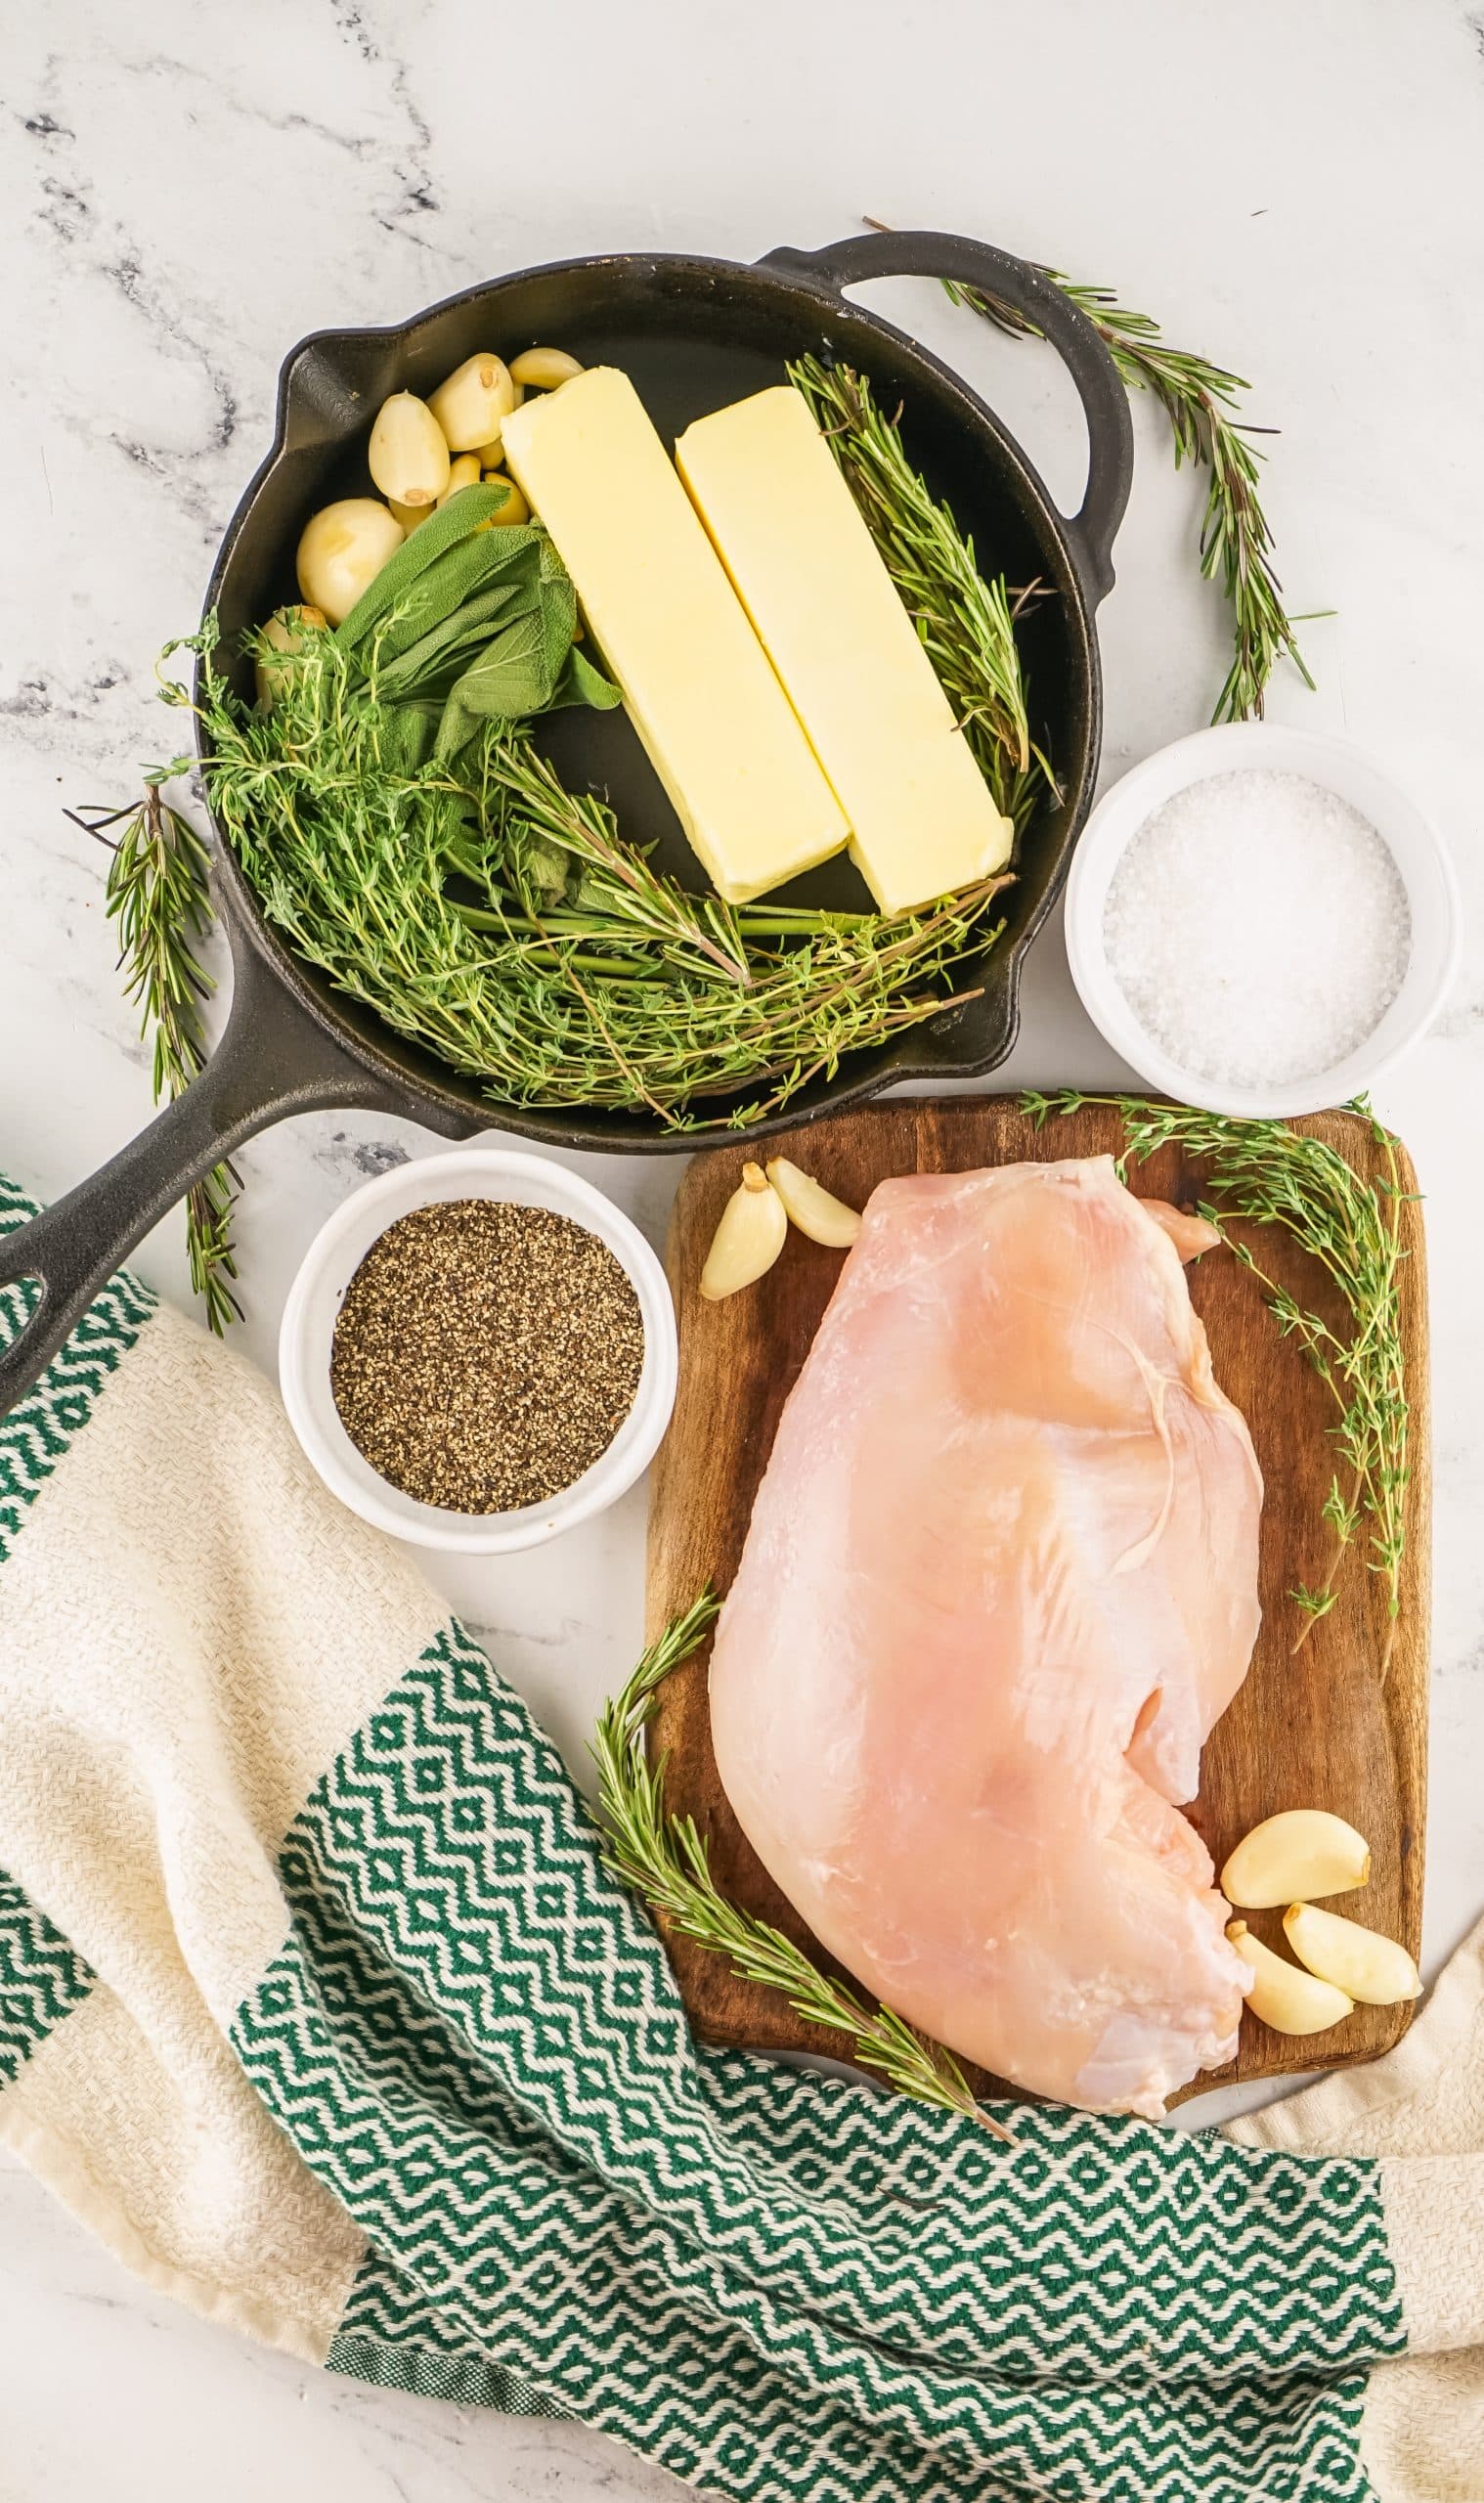 an overhead image showing the measured ingredients needed to make a smoked turkey breast